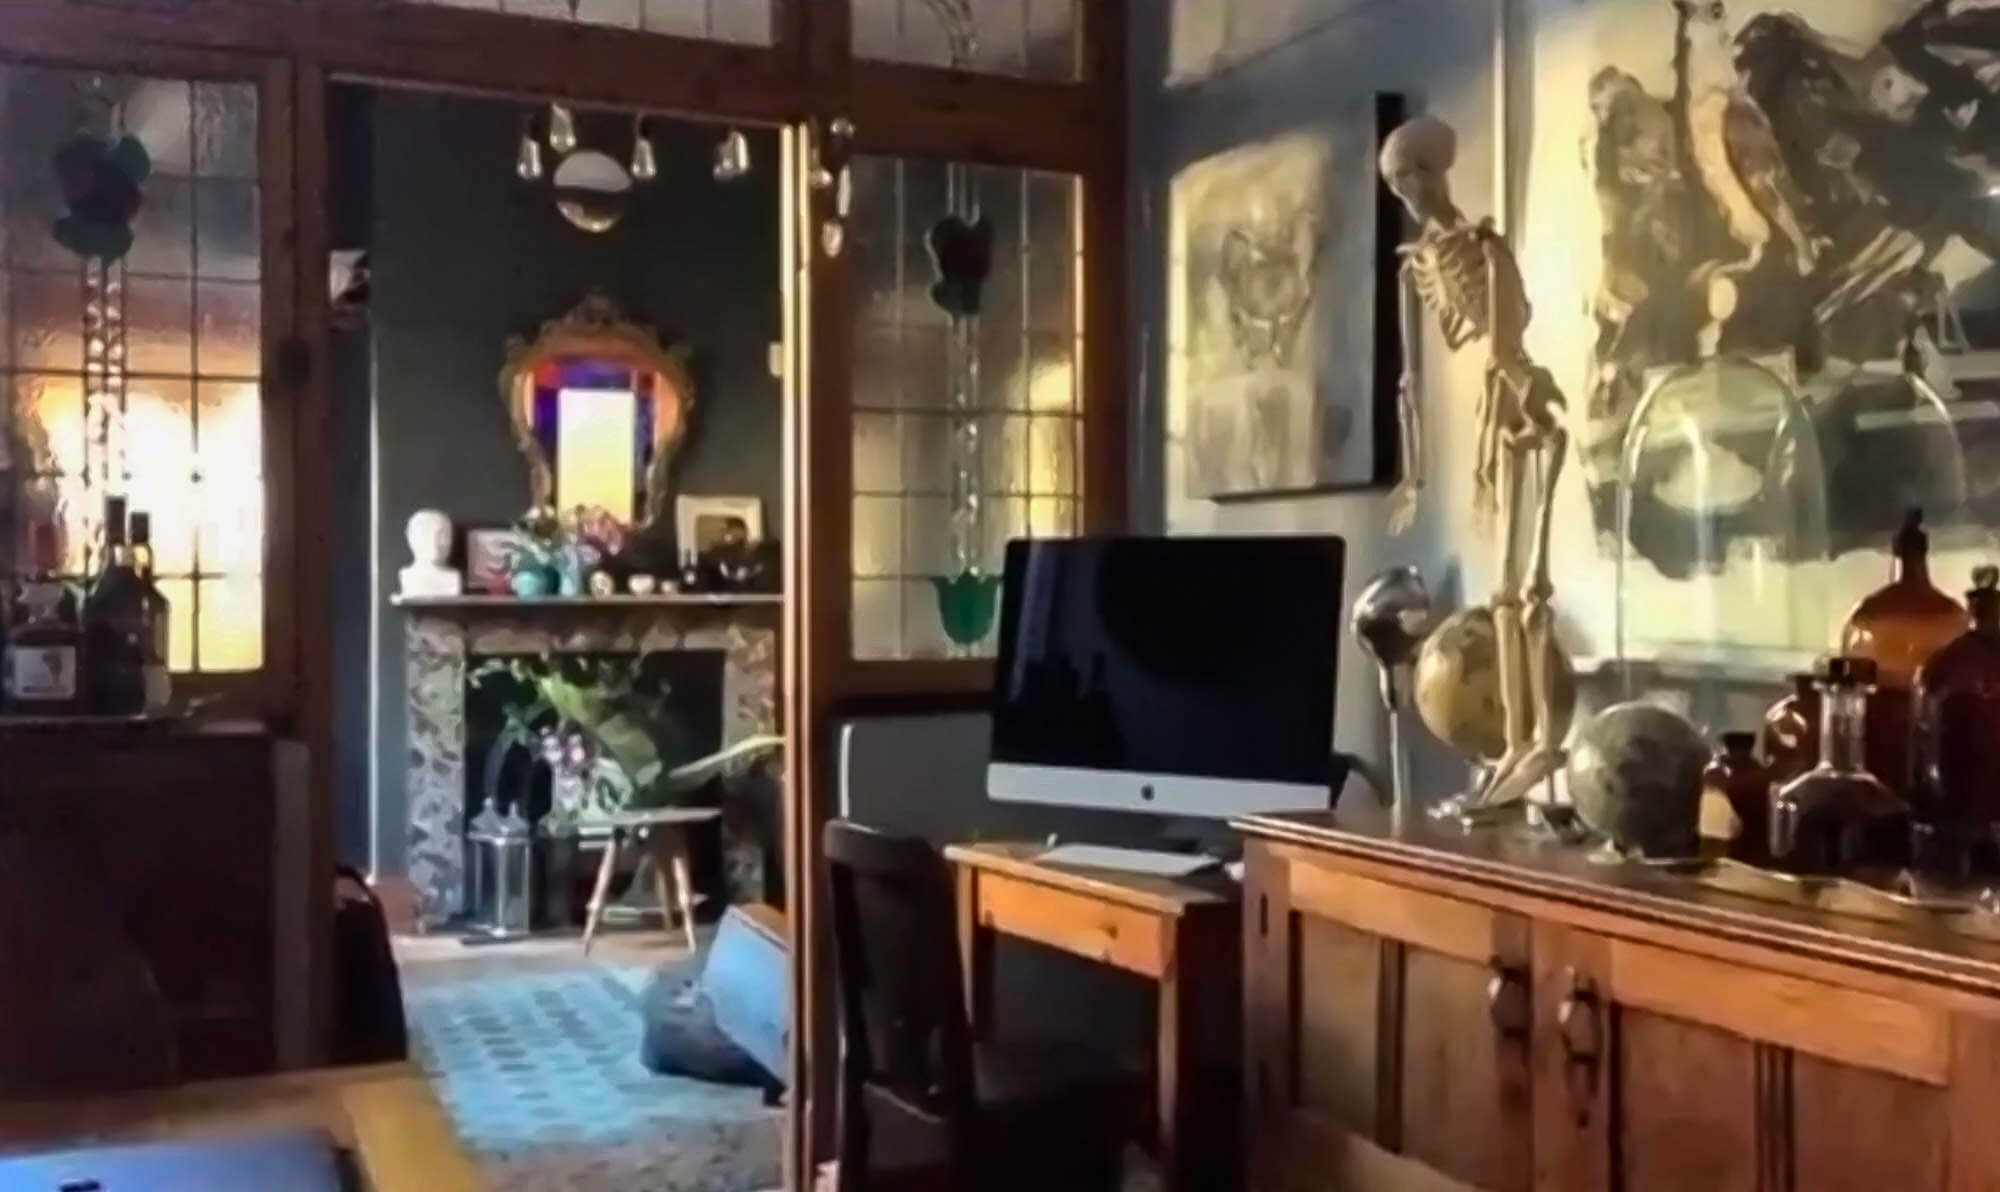 A still lives office space with skeletons